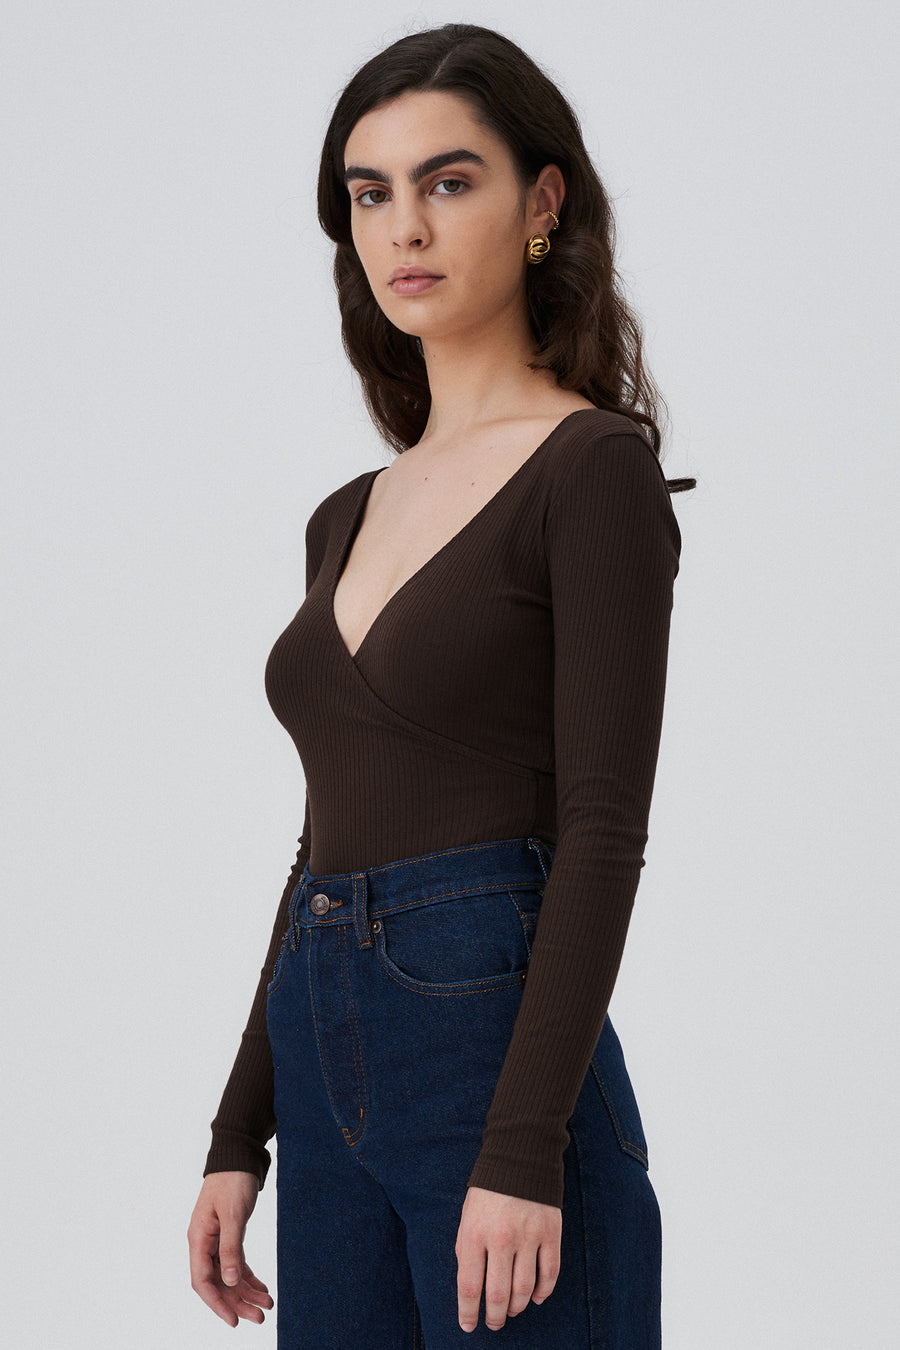 Bodysuit in organic cotton / 01 / 06 / dark chocolate *straight-leg-jeans-from-recycled-cotton-05-13-dark-indigo* ?The model is 172cm tall and wears size XS? |